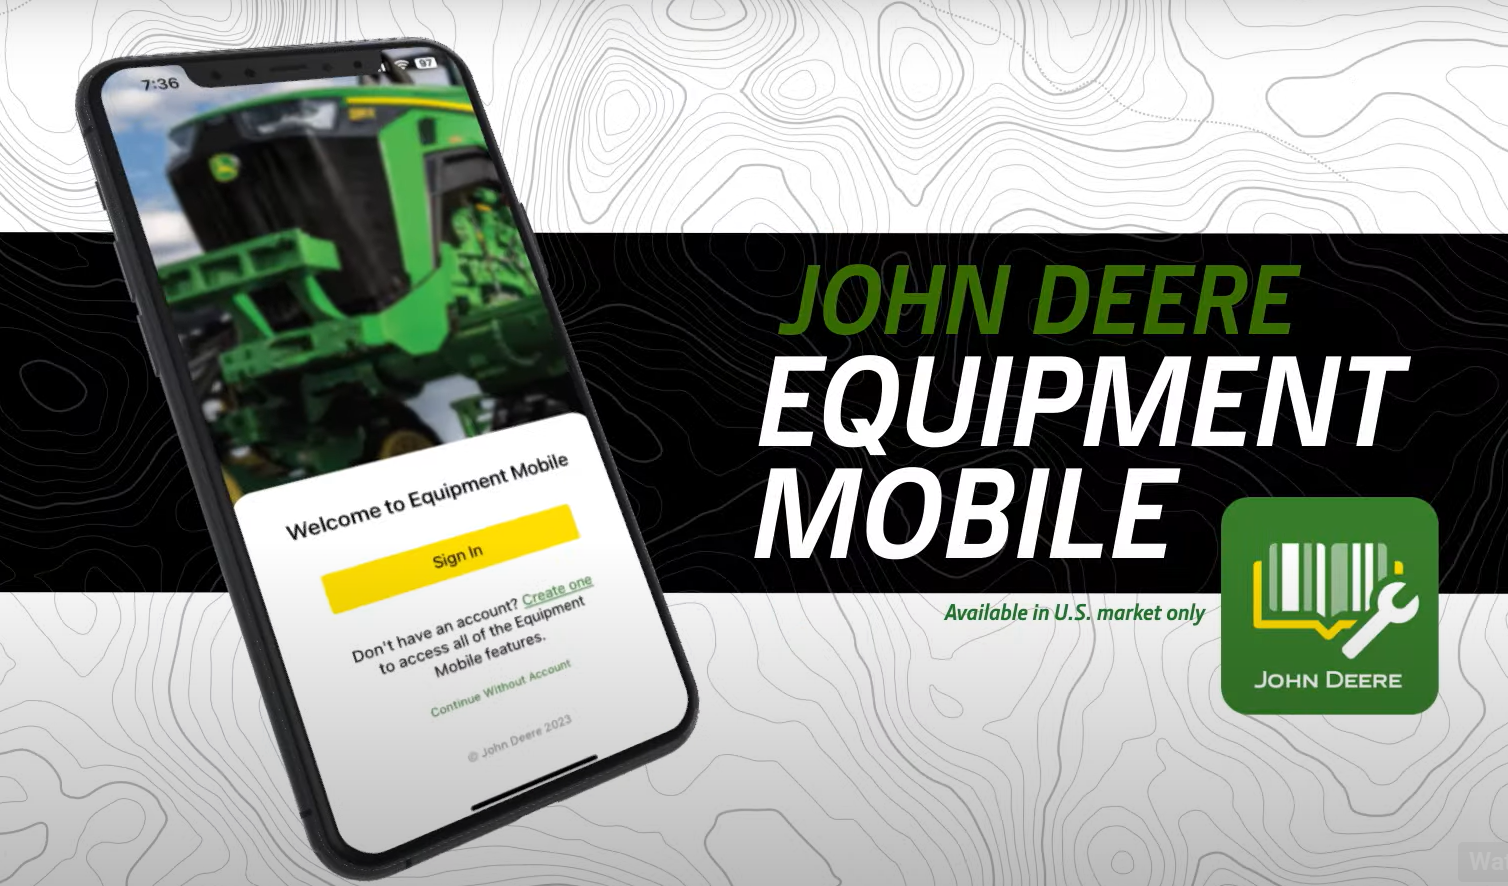 John Deere’s new self-repair solution allows customers to manage software updates for their John Deere products.